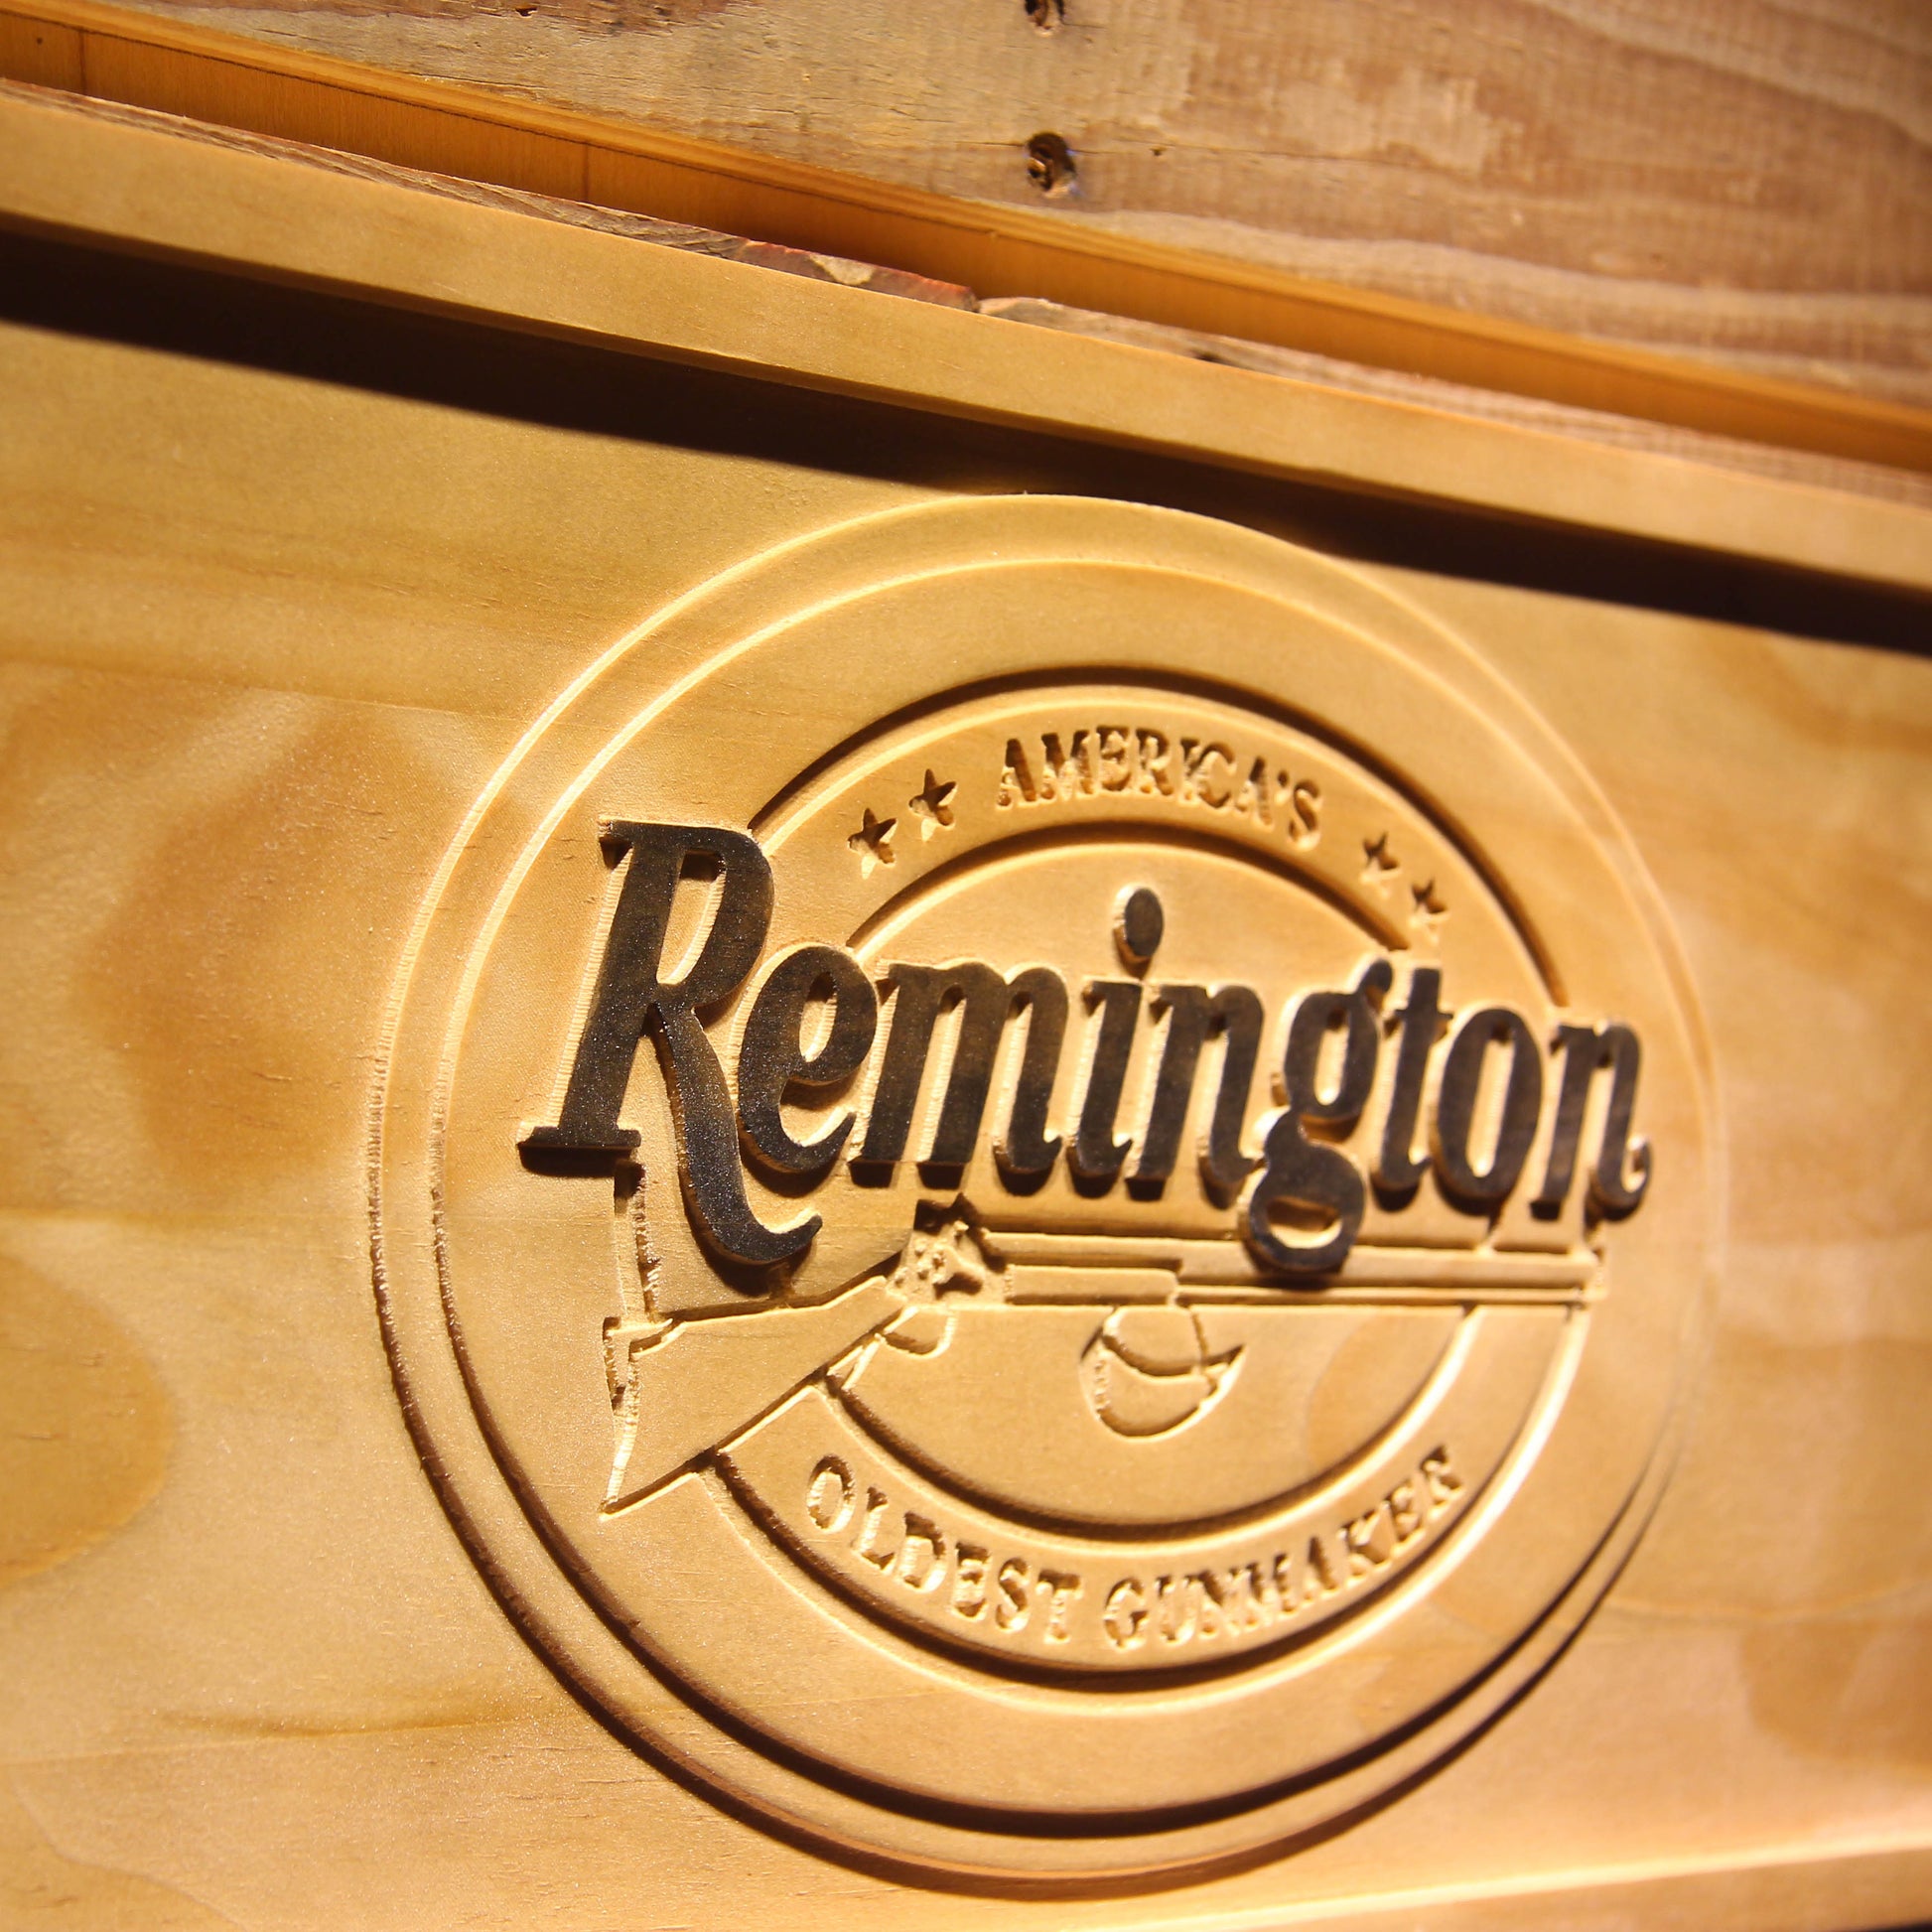 Remington 3D Wooden Bar Signs by Woody Signs Co. - Handmade Crafted Unique Wooden Creative